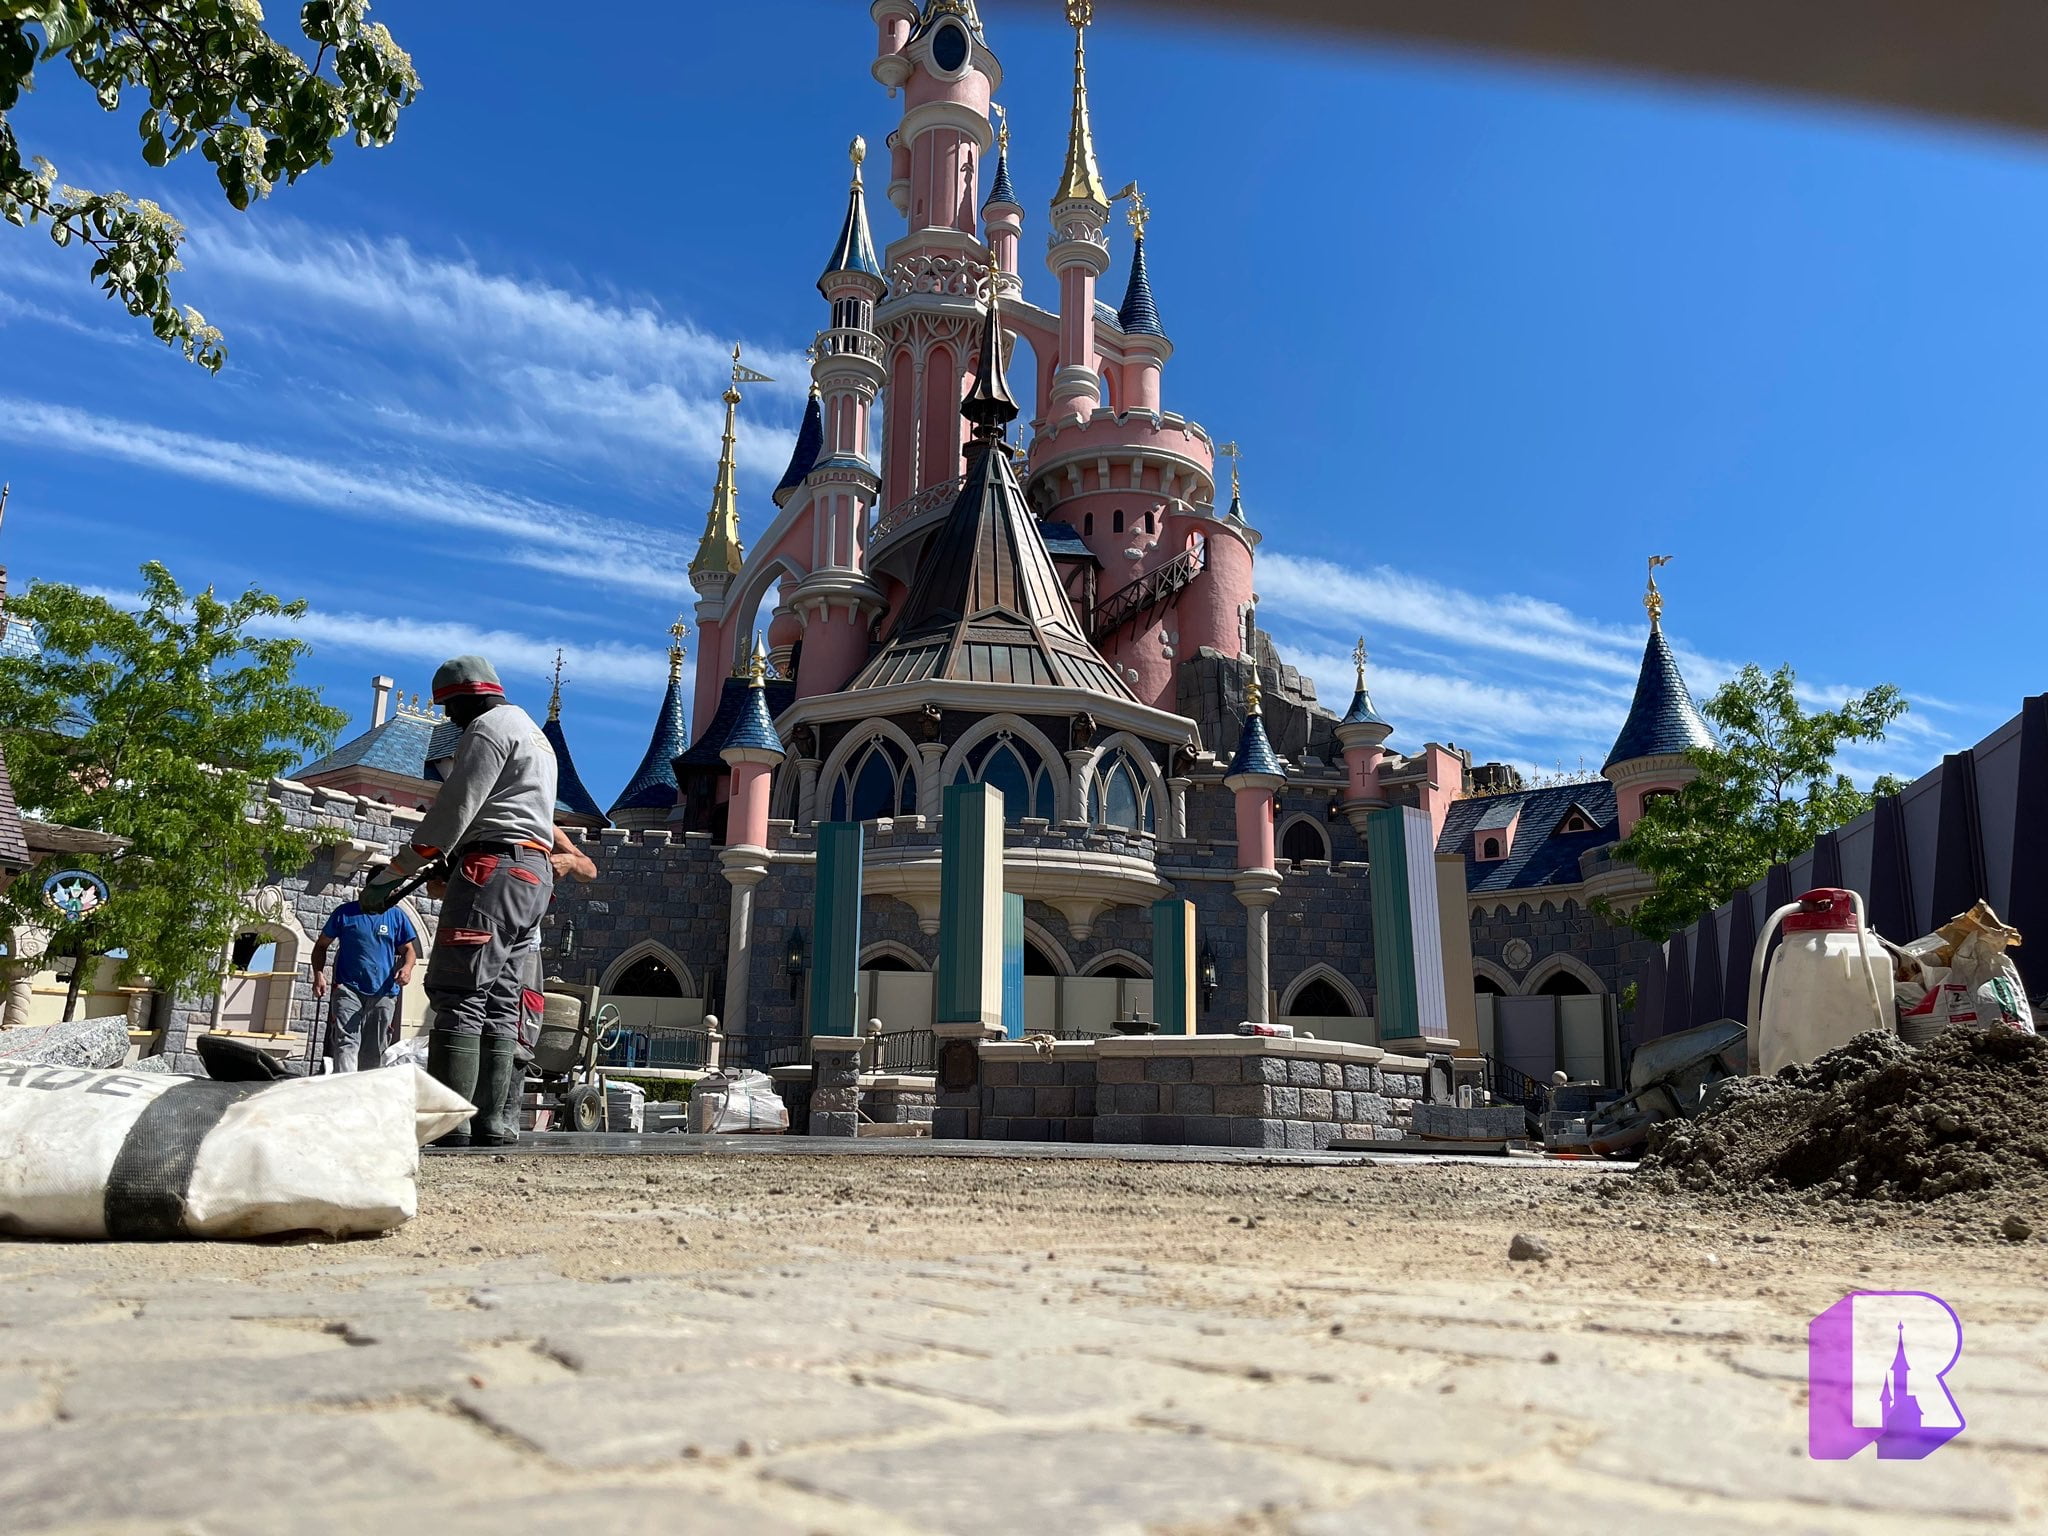 PHOTOS: More of Refurbished Sleeping Beauty Castle Revealed from Behind  Tarps at Disneyland Paris - WDW News Today